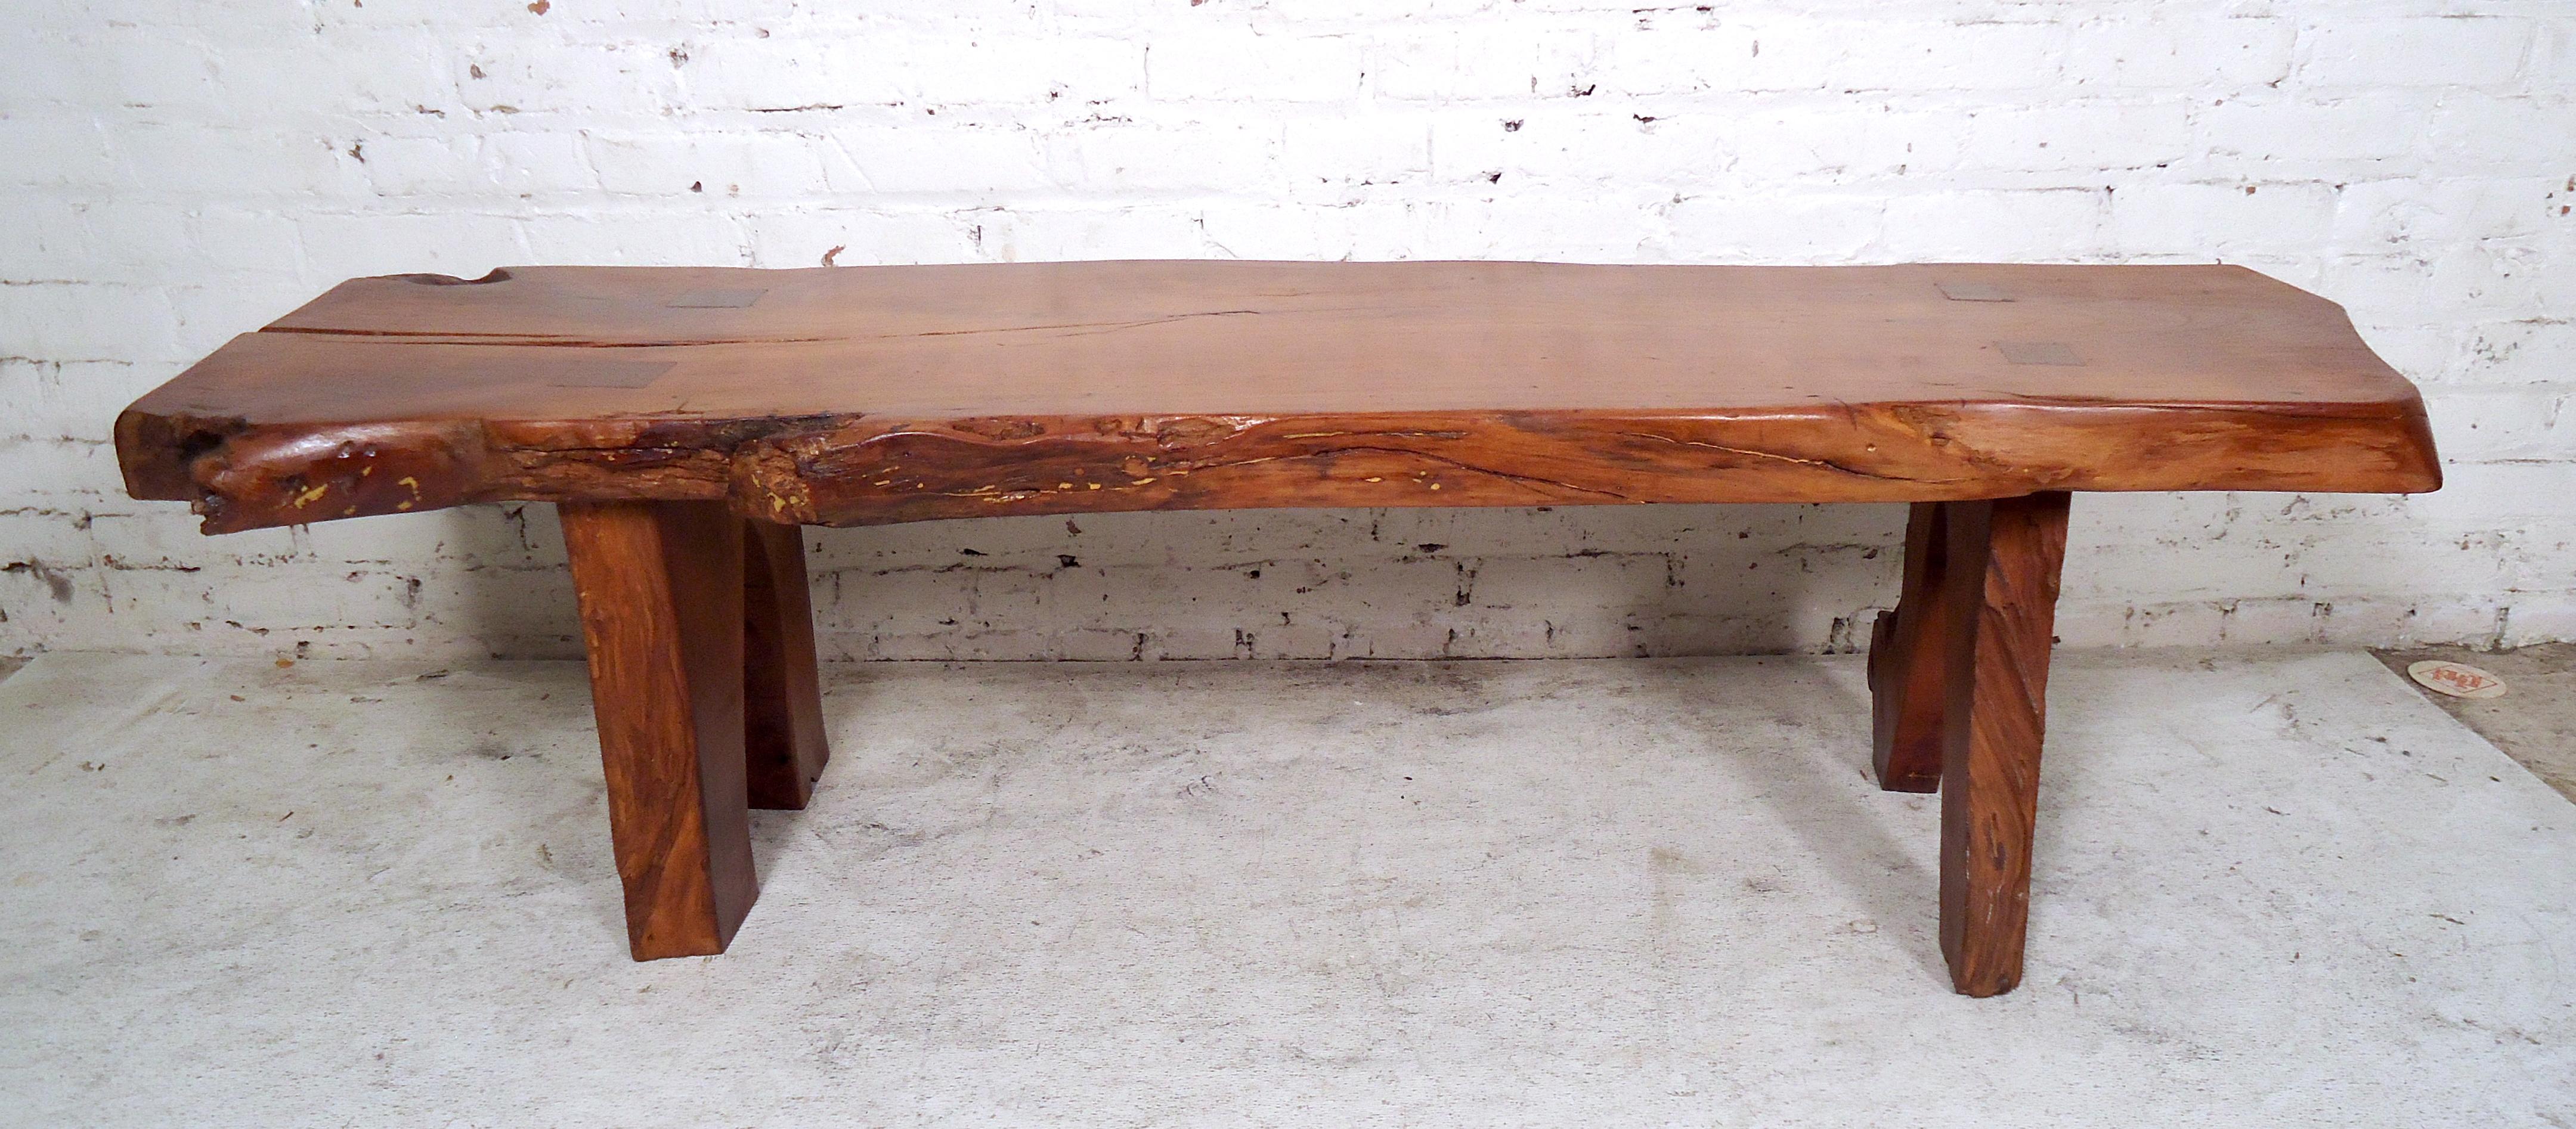 Solid vintage modern live edge bench that can be used as a coffee table, this piece would make a great addition to any home or office.
Please confirm item location NY or NJ with dealer.